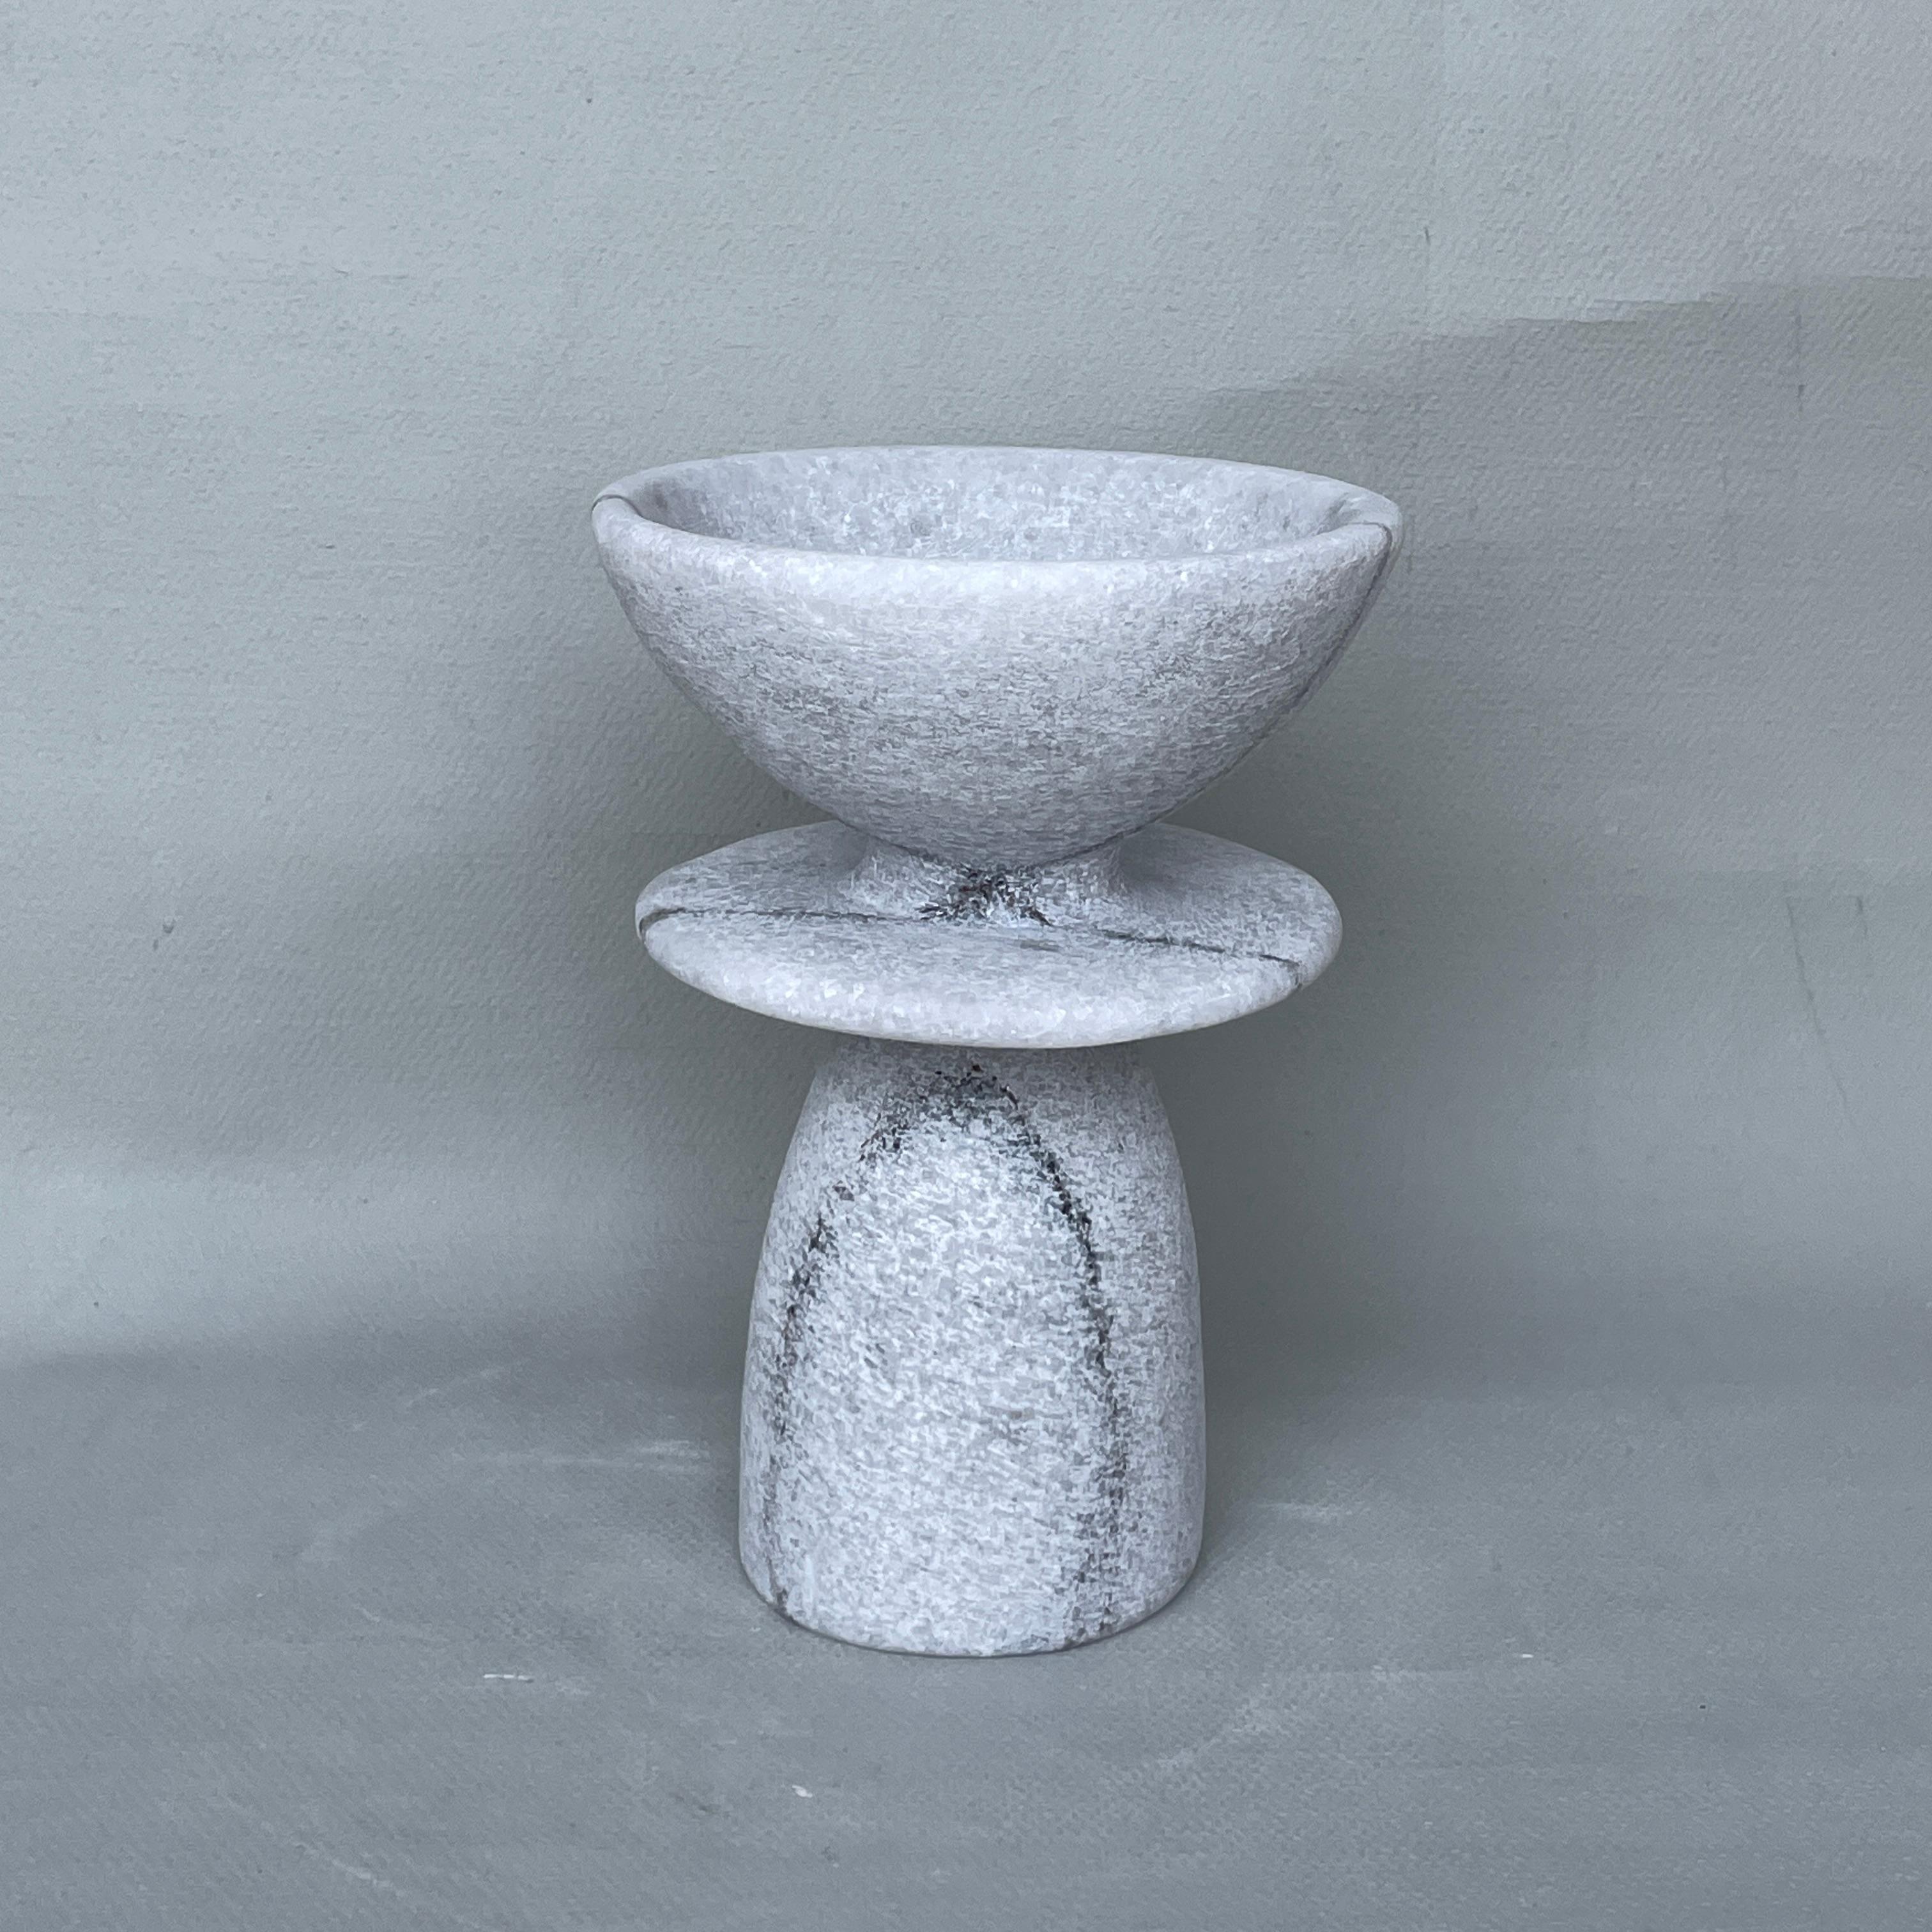 Unique Naxian Marble Vessel by Tom Von Kaenel
Unique piece.
Dimensions: Ø 12.5 x H 18 cm.
Materials: Naxian marble.

The surfaces of the objects are not sealed, they are not protected against acid. The lines of the handcraft are visible it